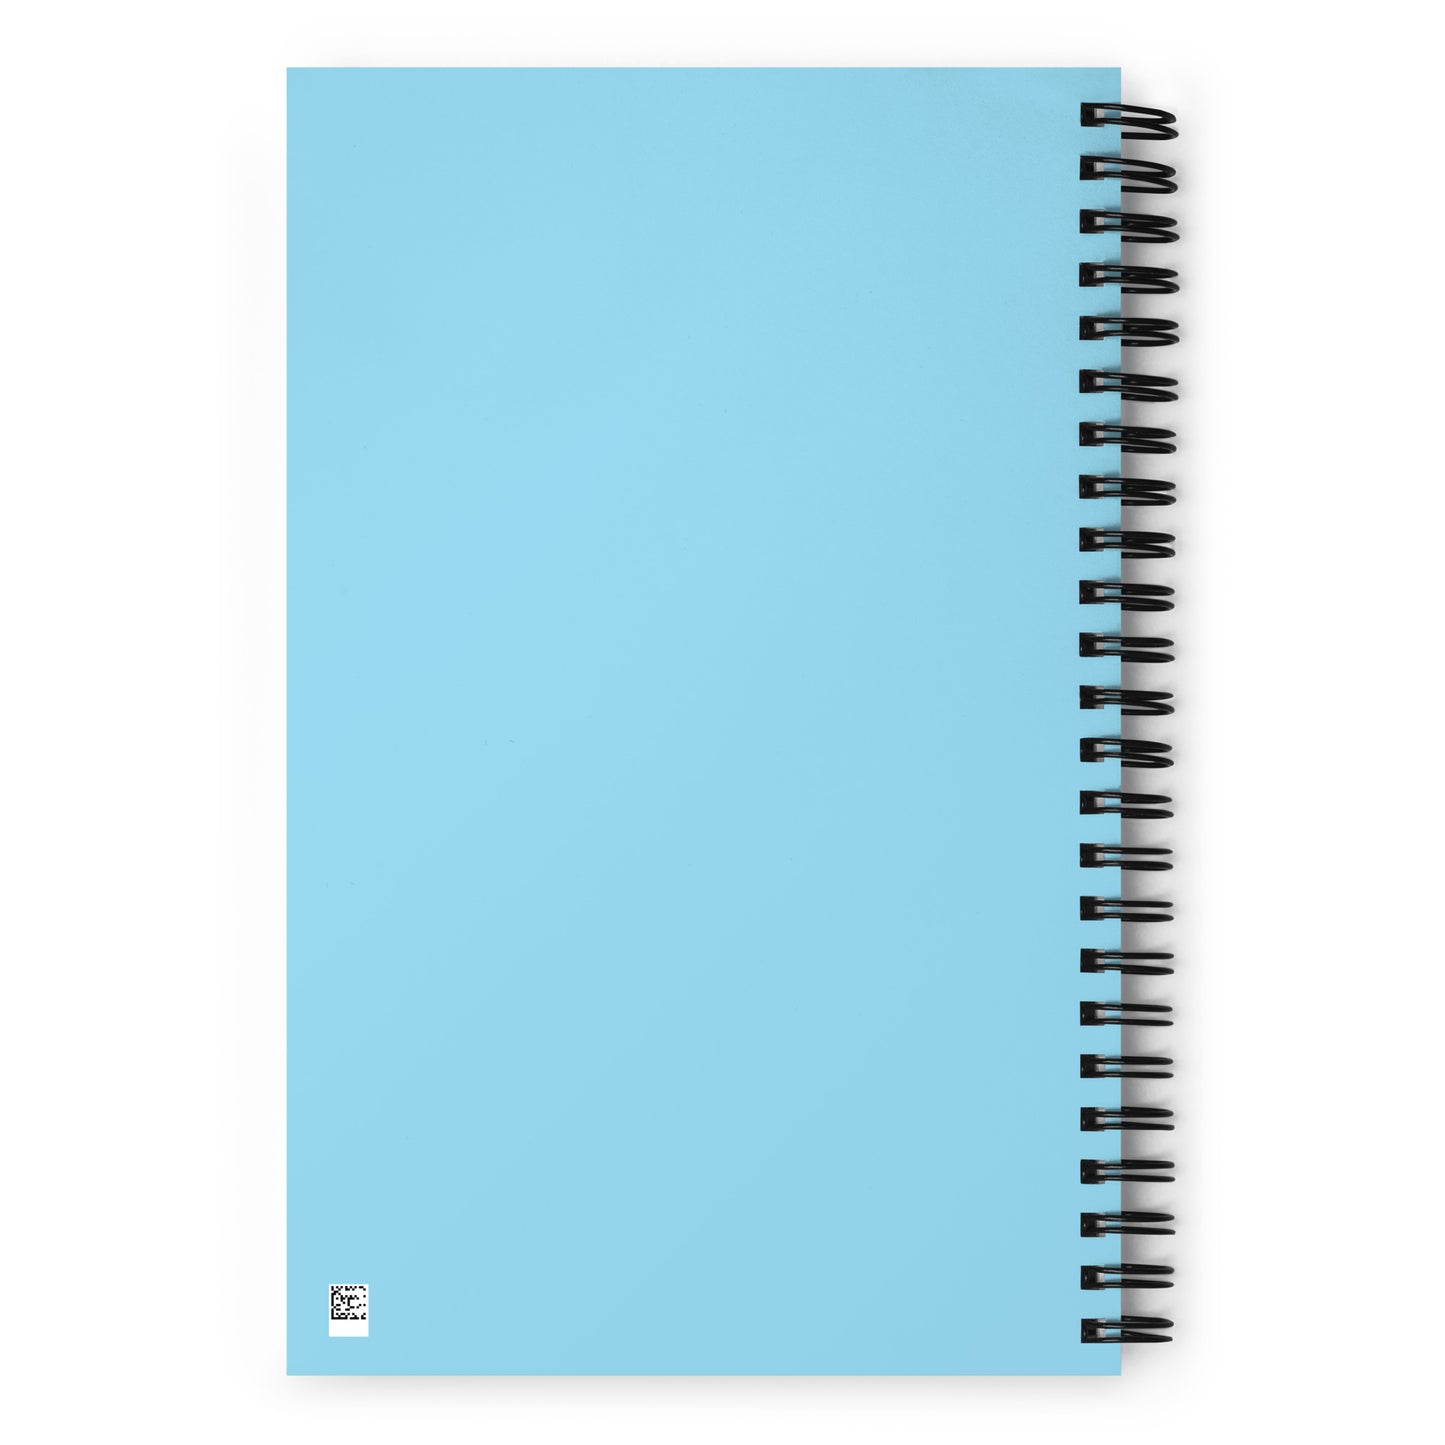 The back side of a blue wirebound notebook.